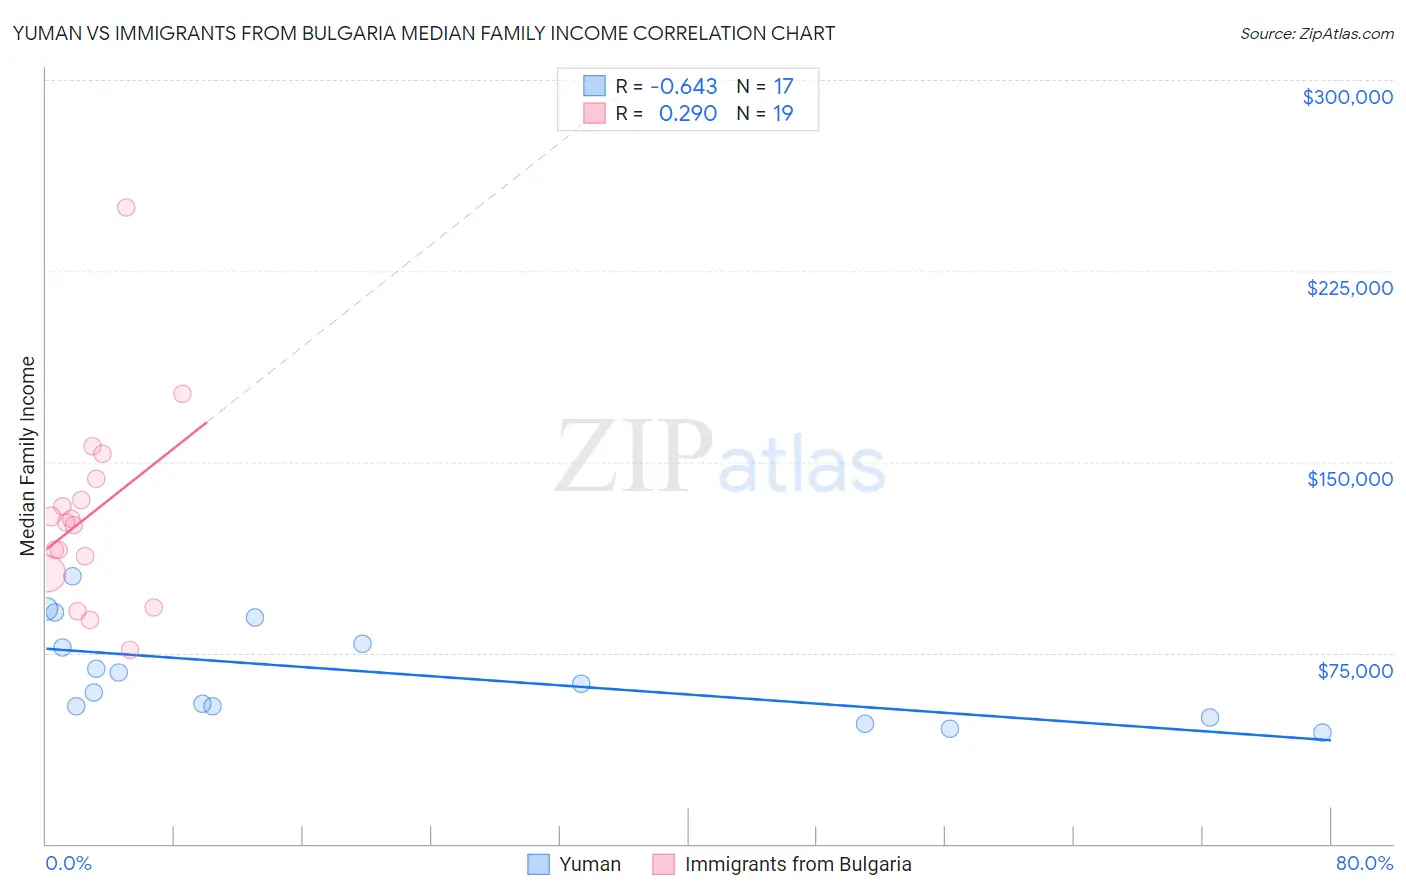 Yuman vs Immigrants from Bulgaria Median Family Income